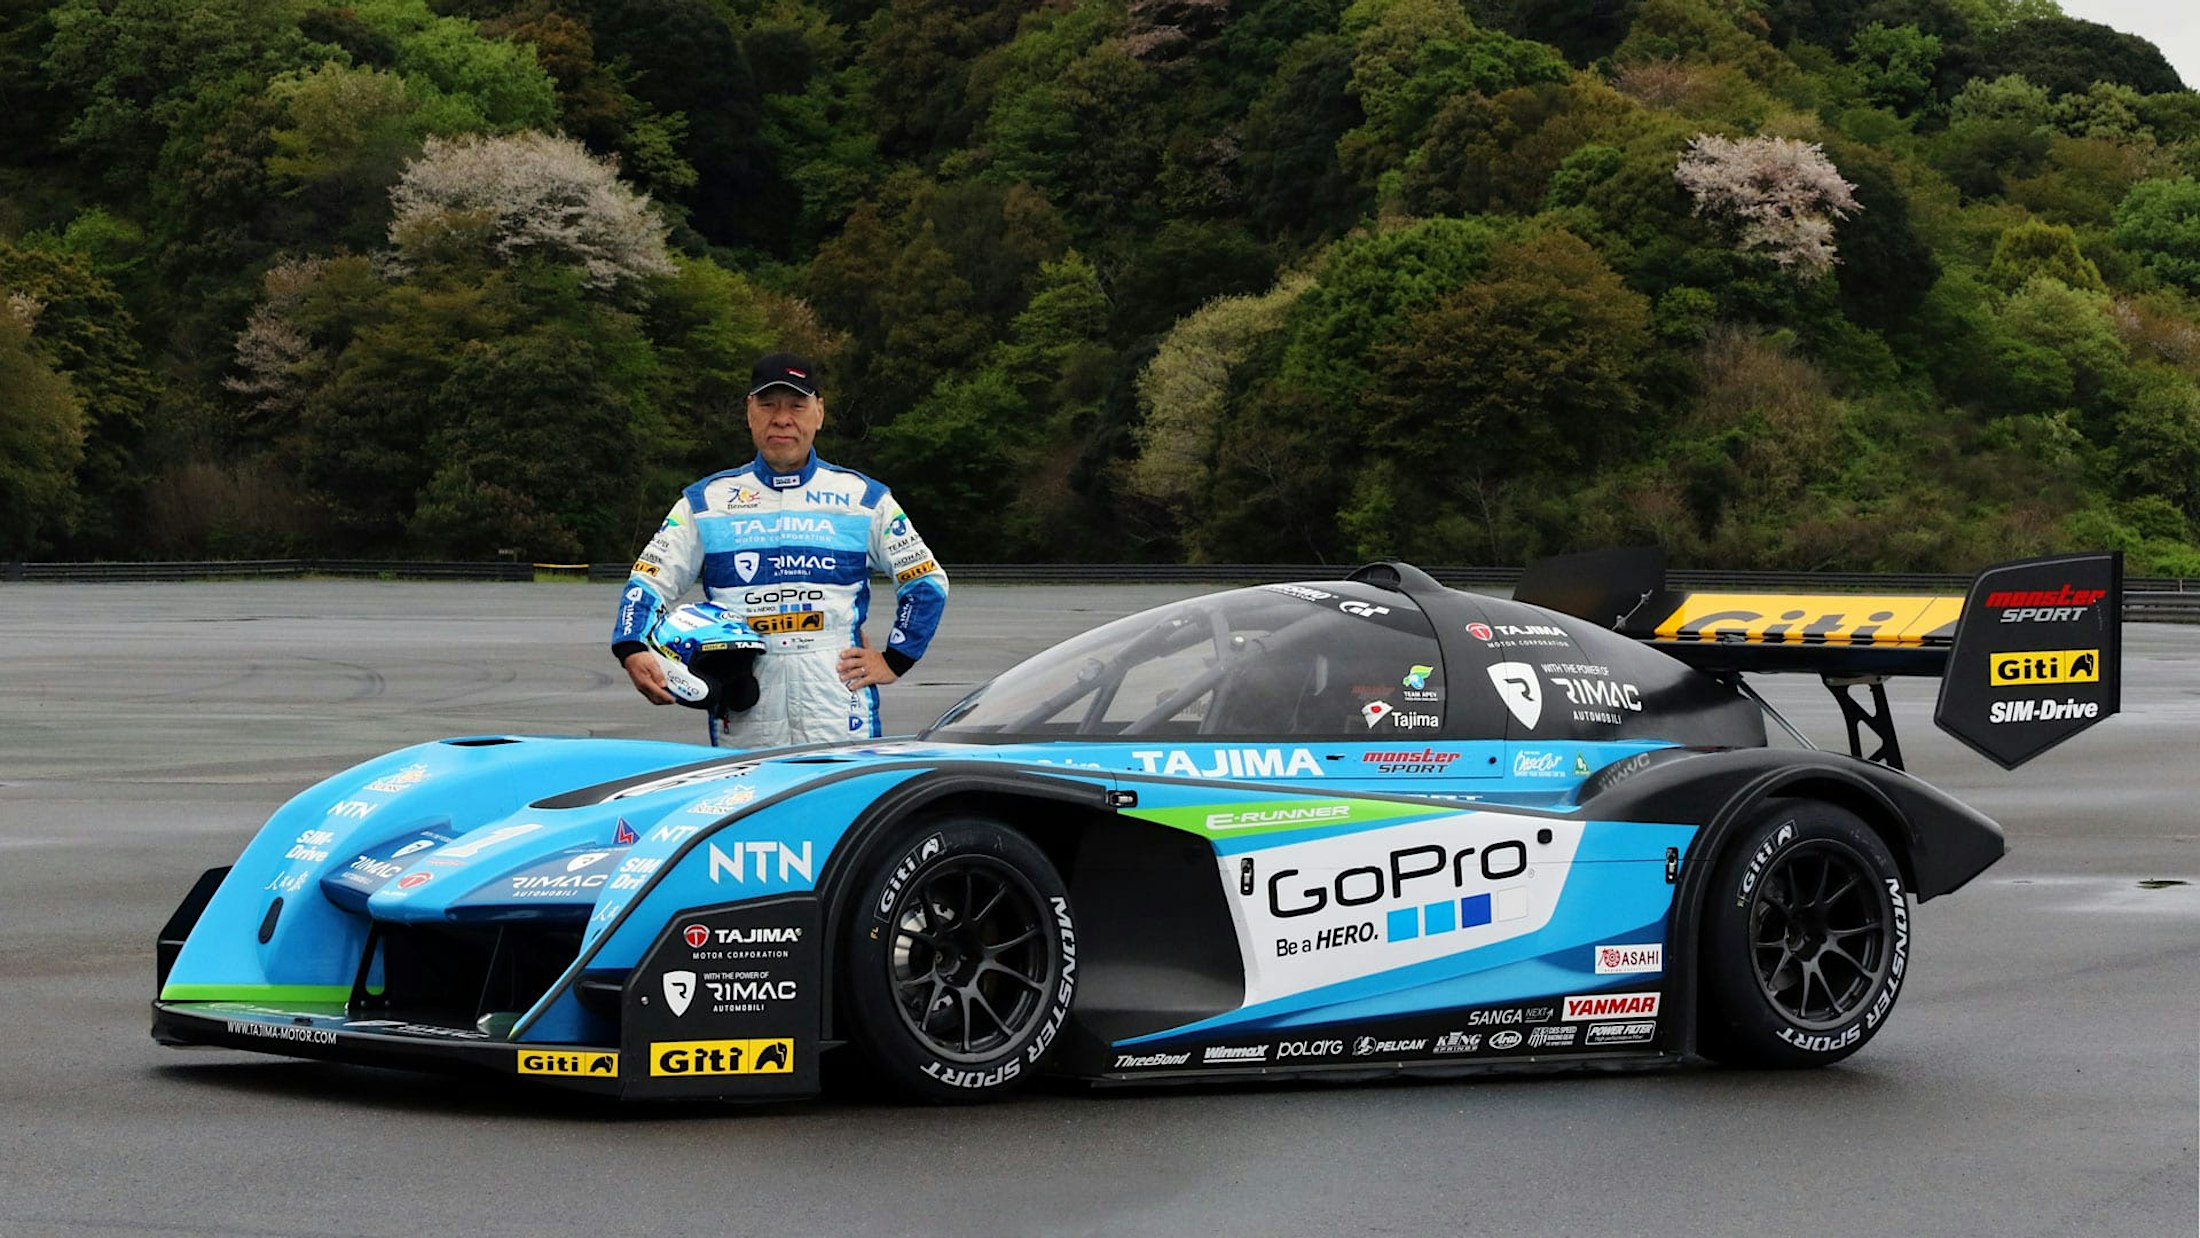 Rimac Automobili goes for the podium of the Pikes Peak International Hill Climb Challenge